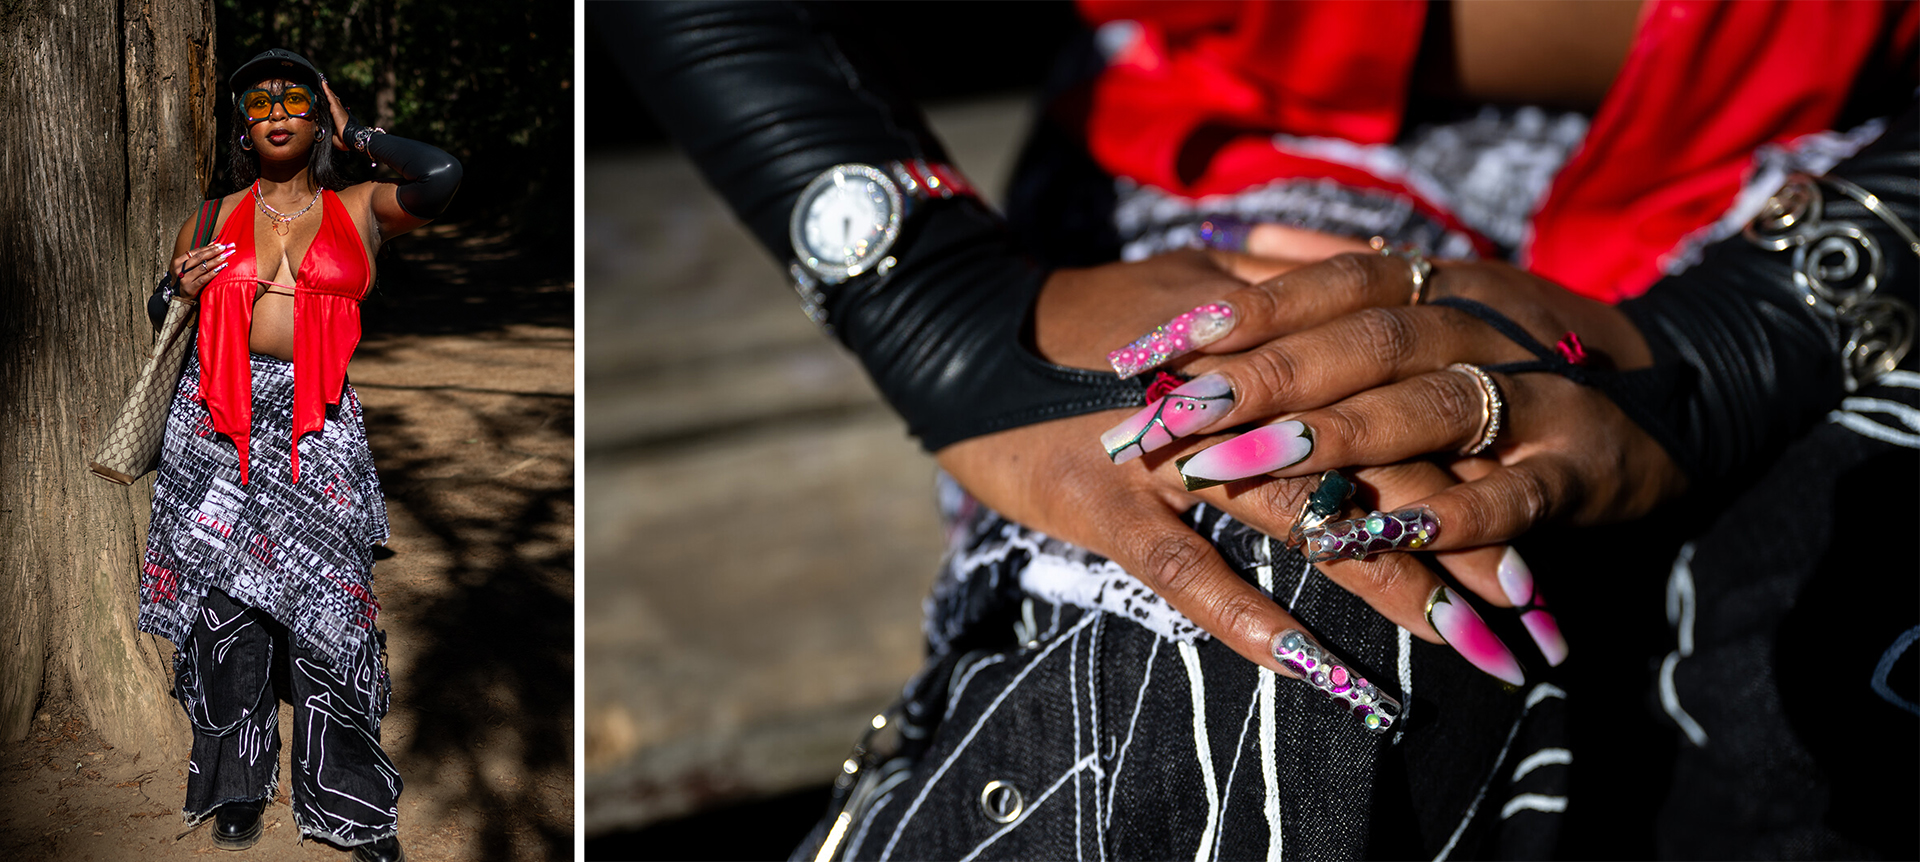 Diptych of a full-body shot of woman in red top and layered pants/skirt and close-up of ornate nails